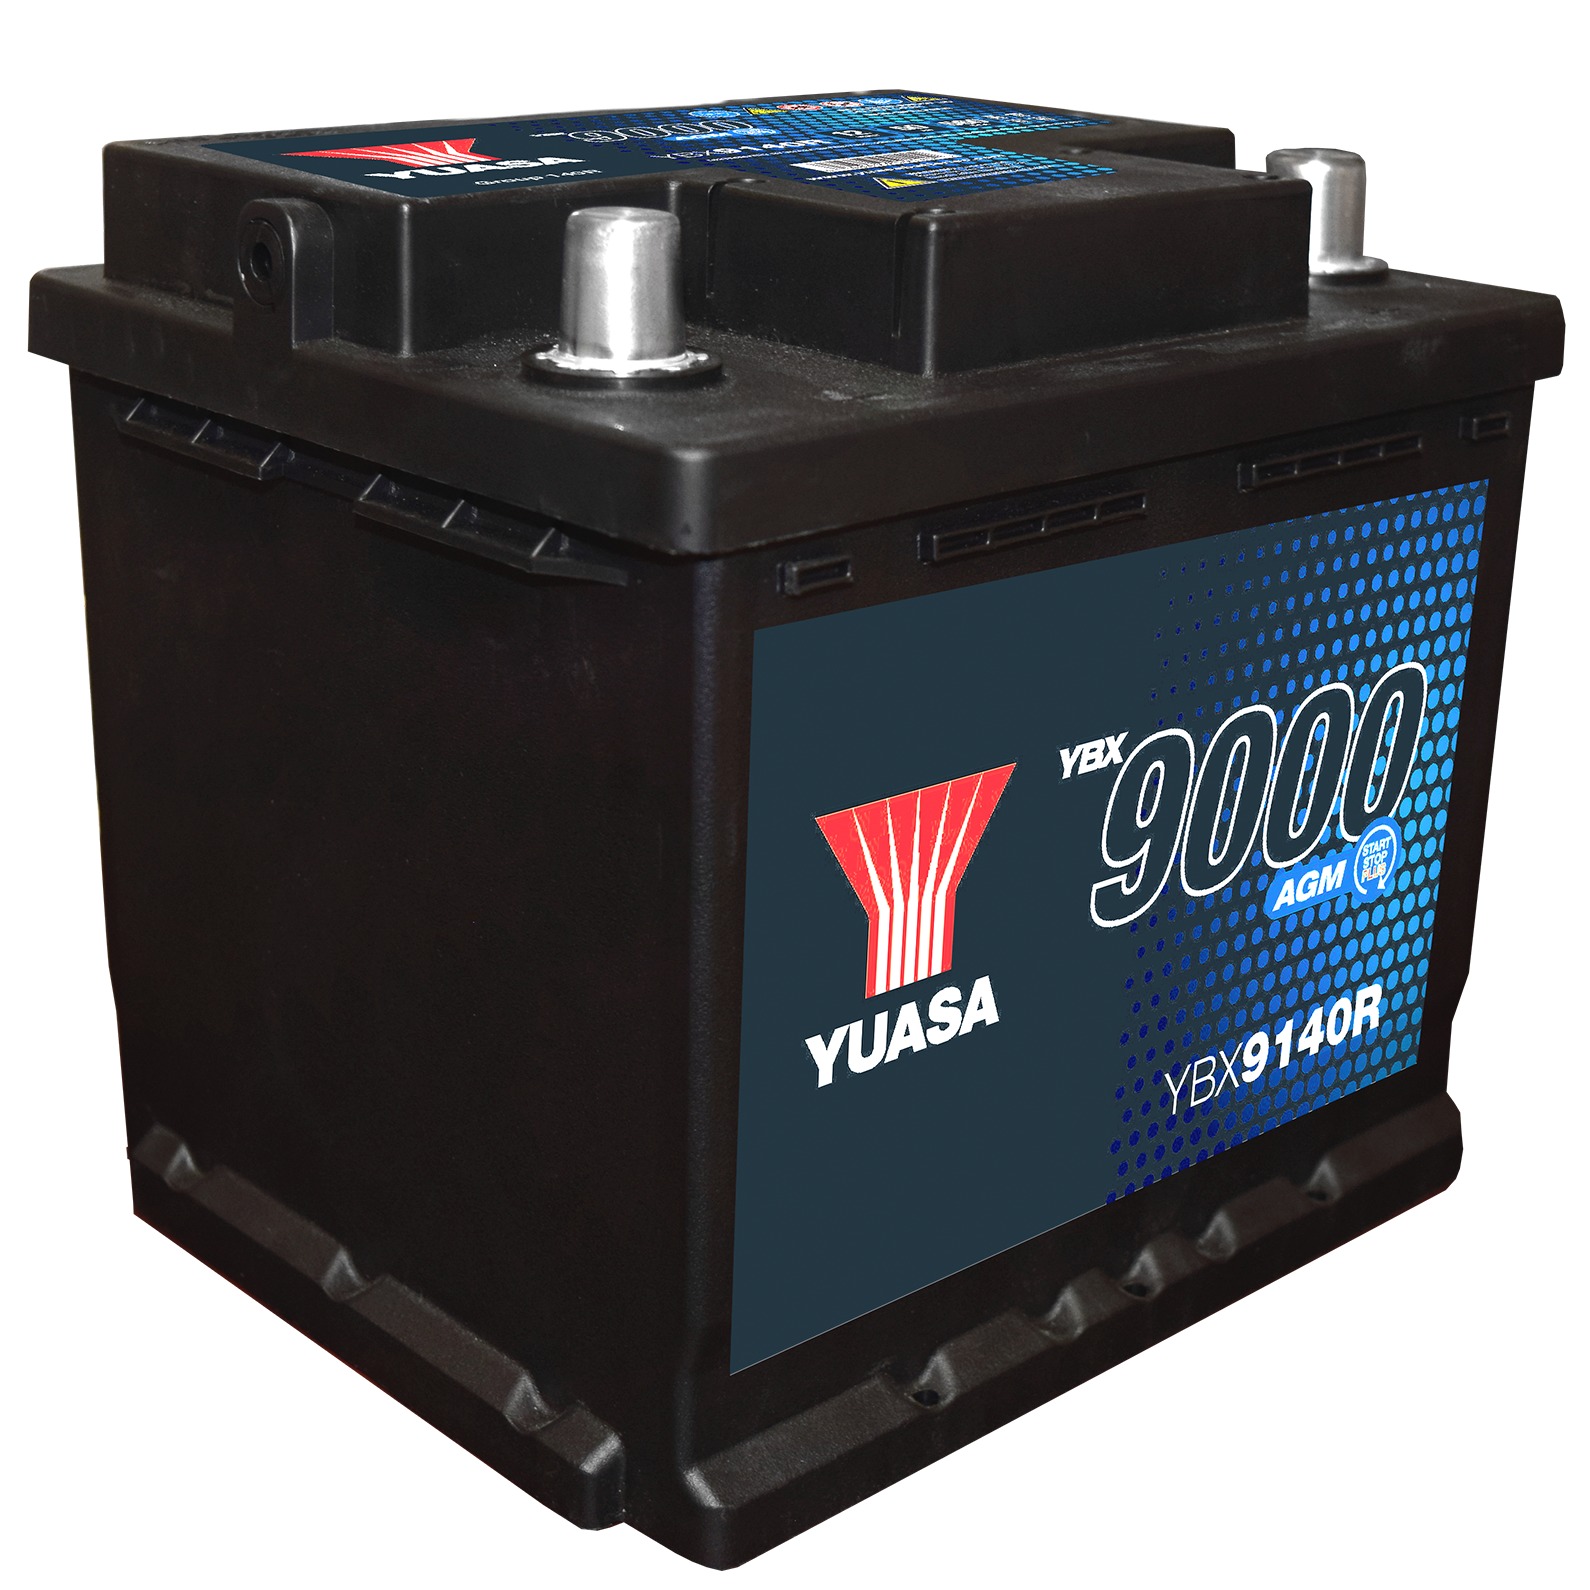 YBX9000 YBX9140R AGM Battery - 560 CCA, 50 Ah, Replaces 4014132-P - Includes Battery Hold-Down Bracket For Polaris Rangers - Click Image to Close